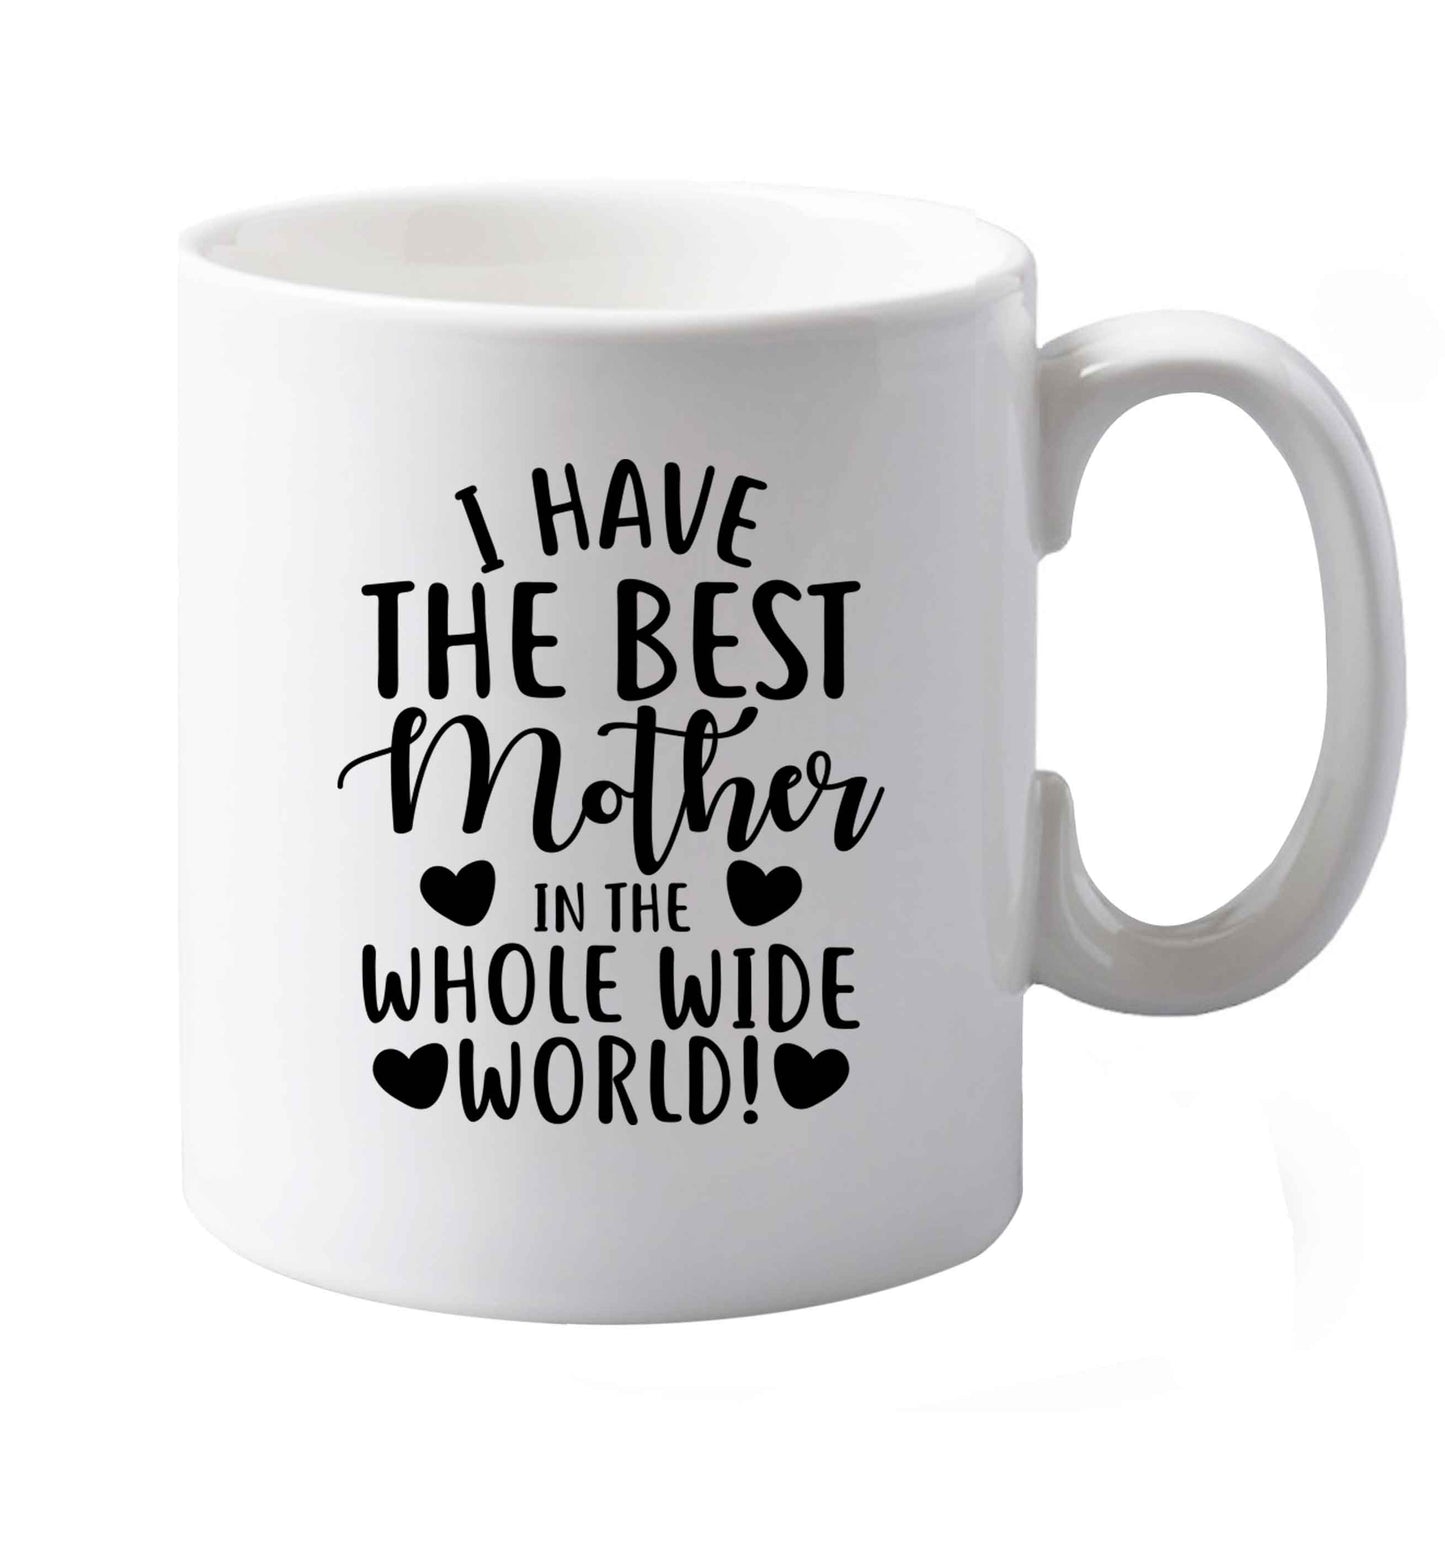 10 oz I have the best mother in the whole wide world ceramic mug both sides